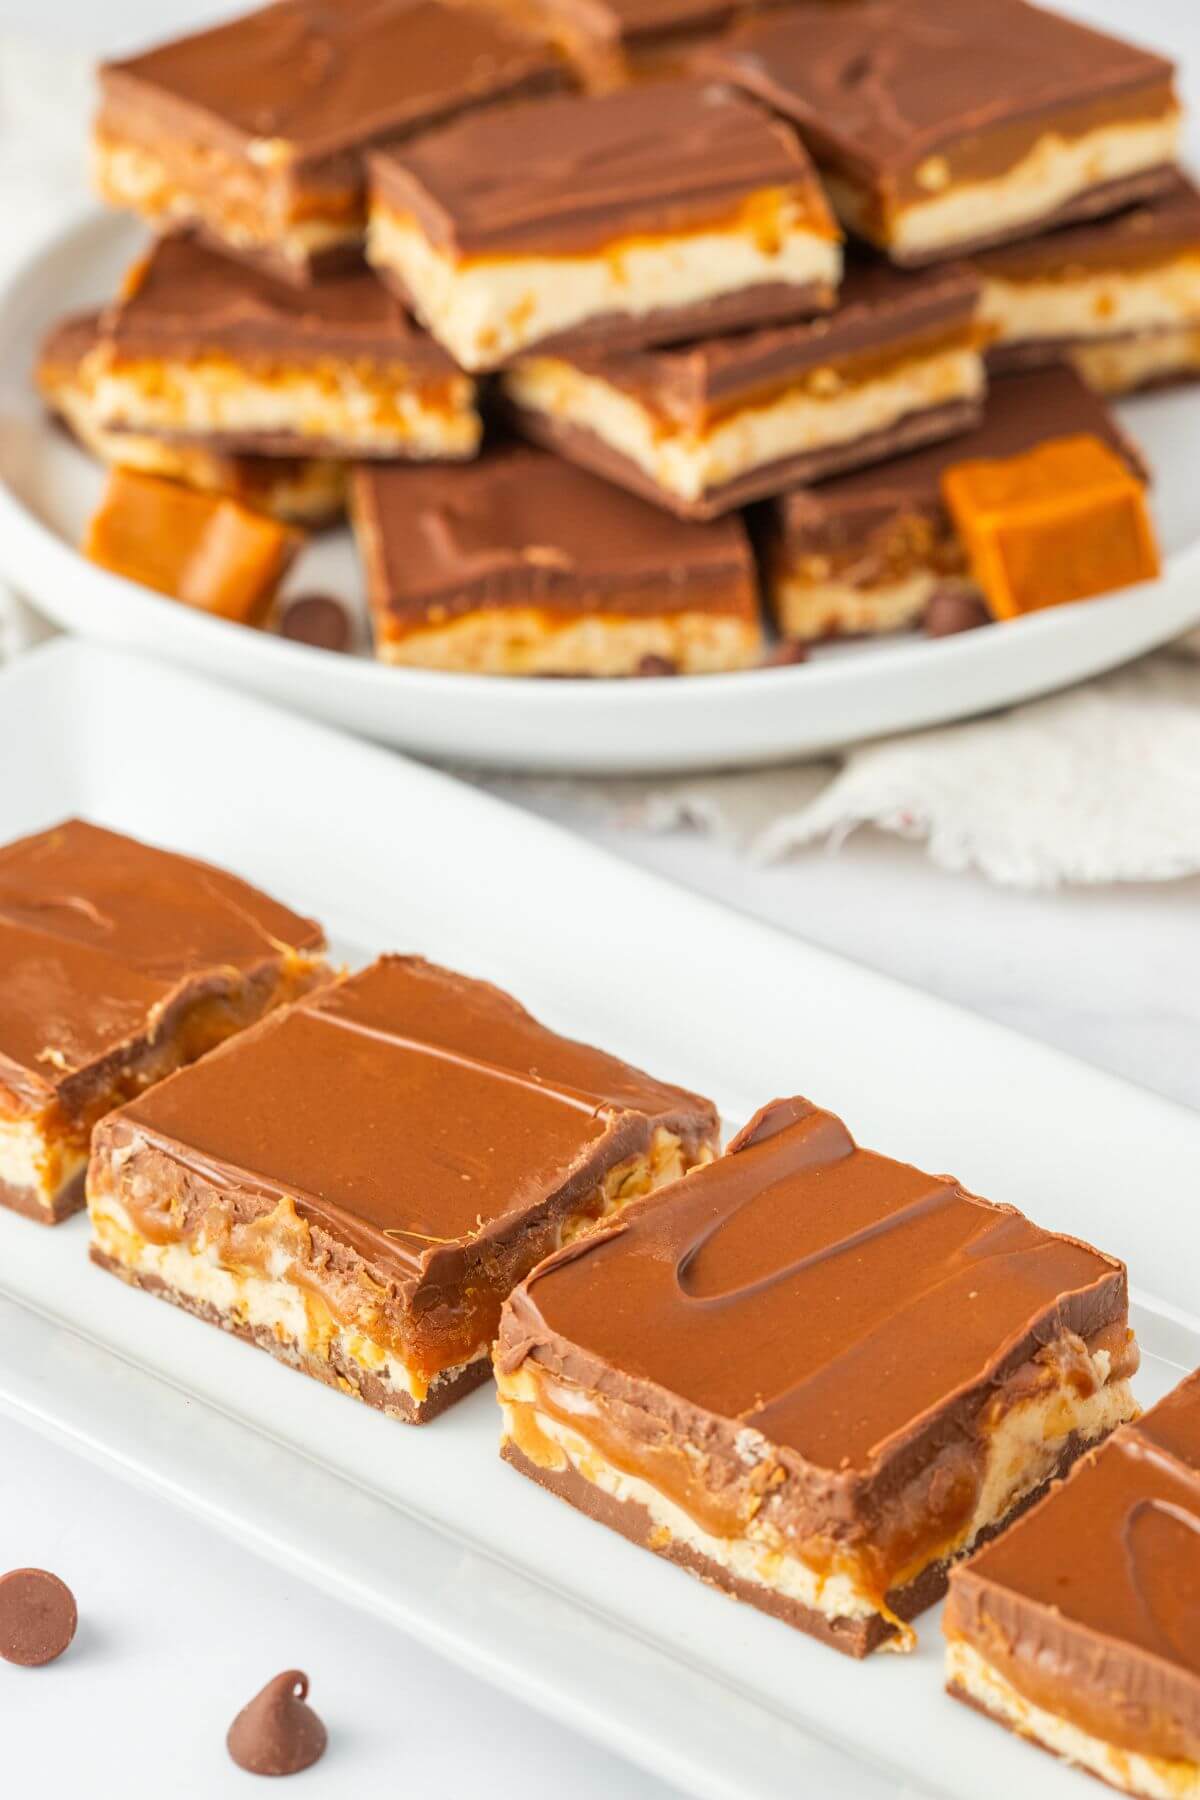 A diagonal row of fudge bars are in front of full plate of fudge.